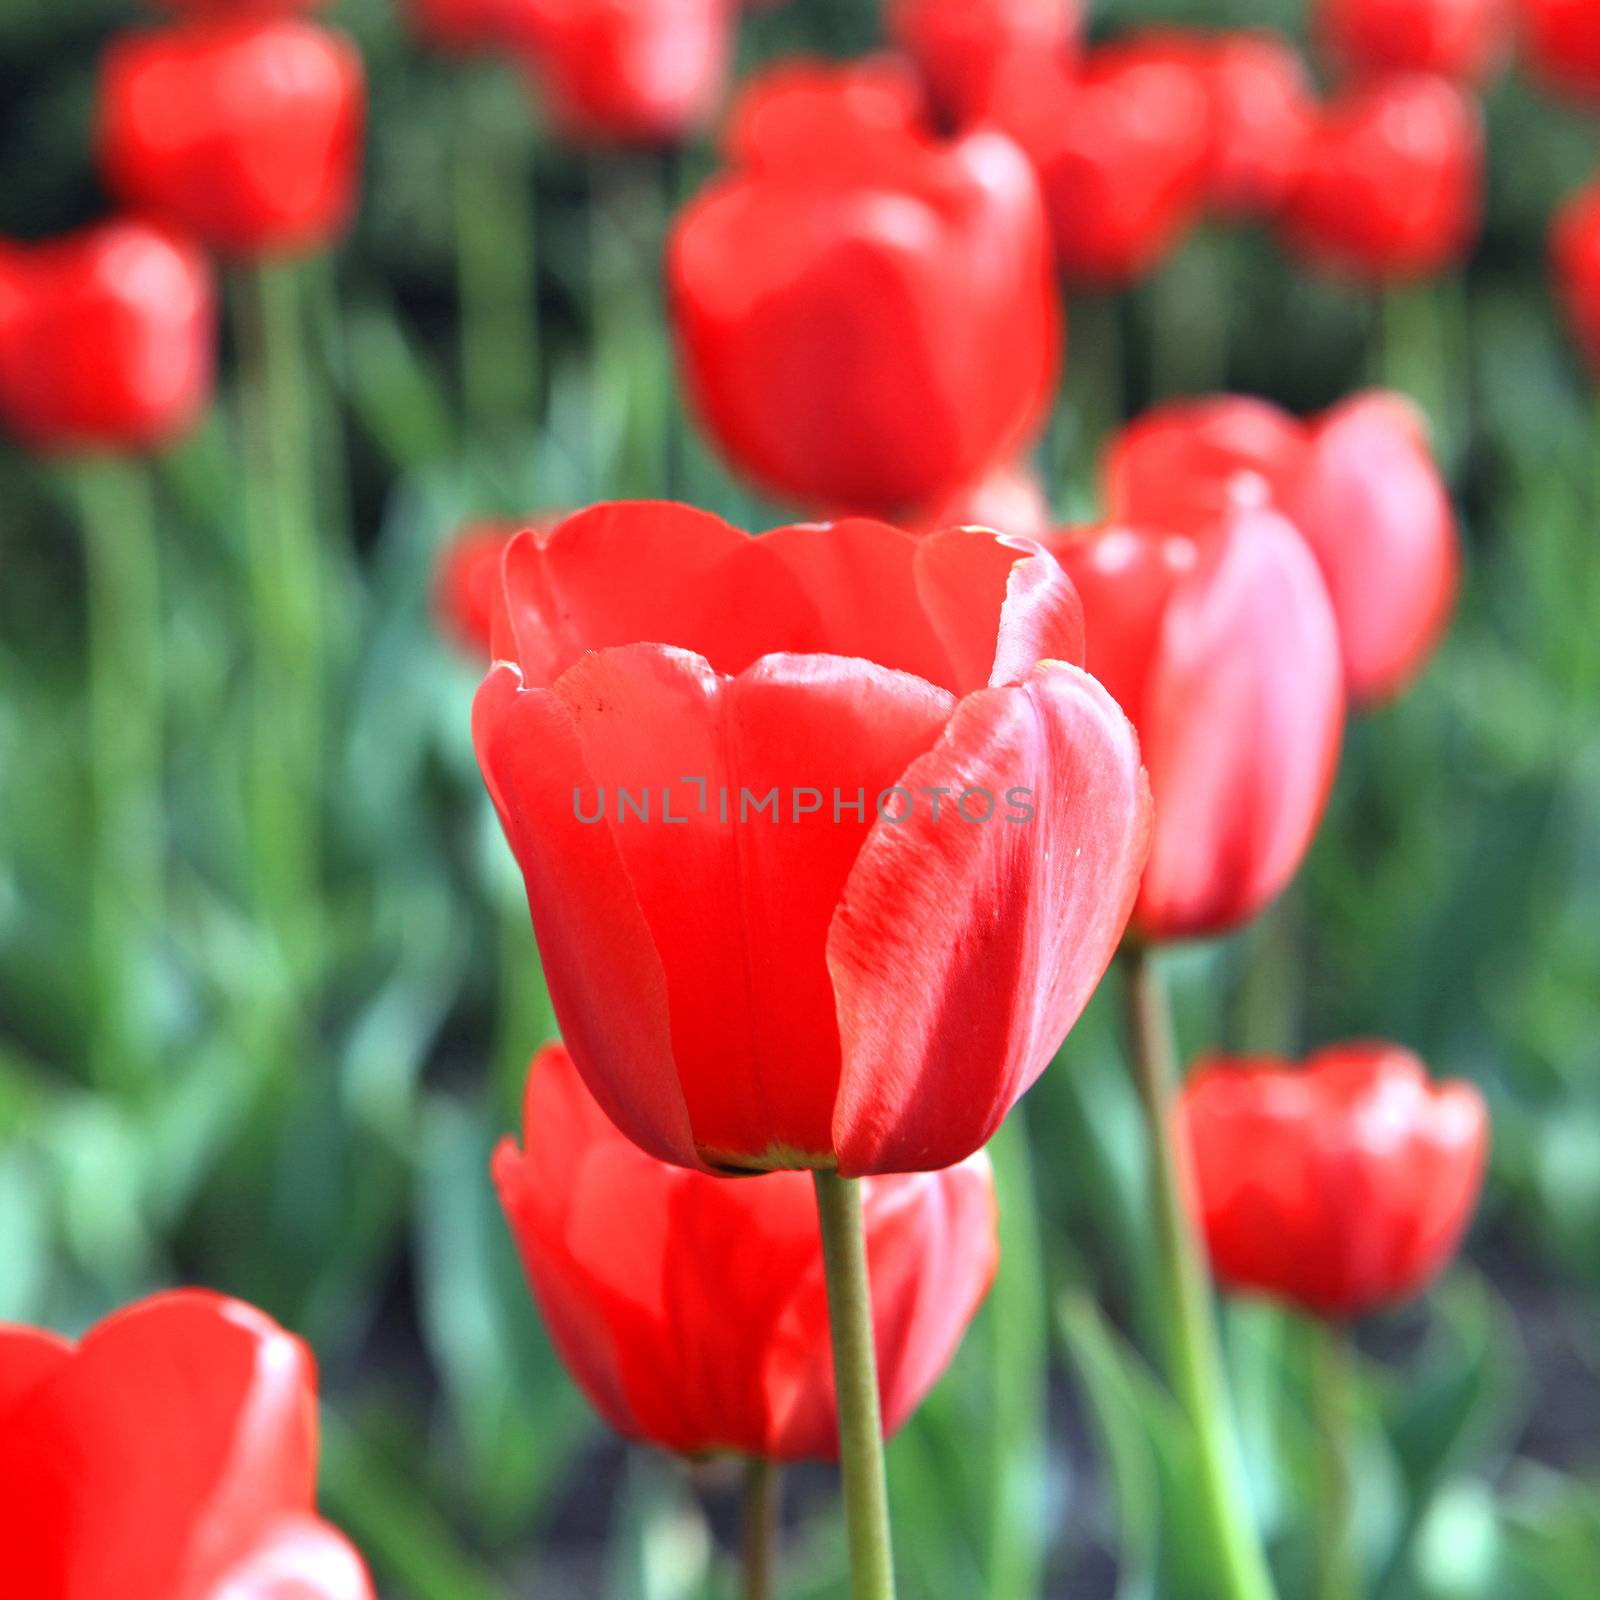 tulip flowers closeup image by ssuaphoto